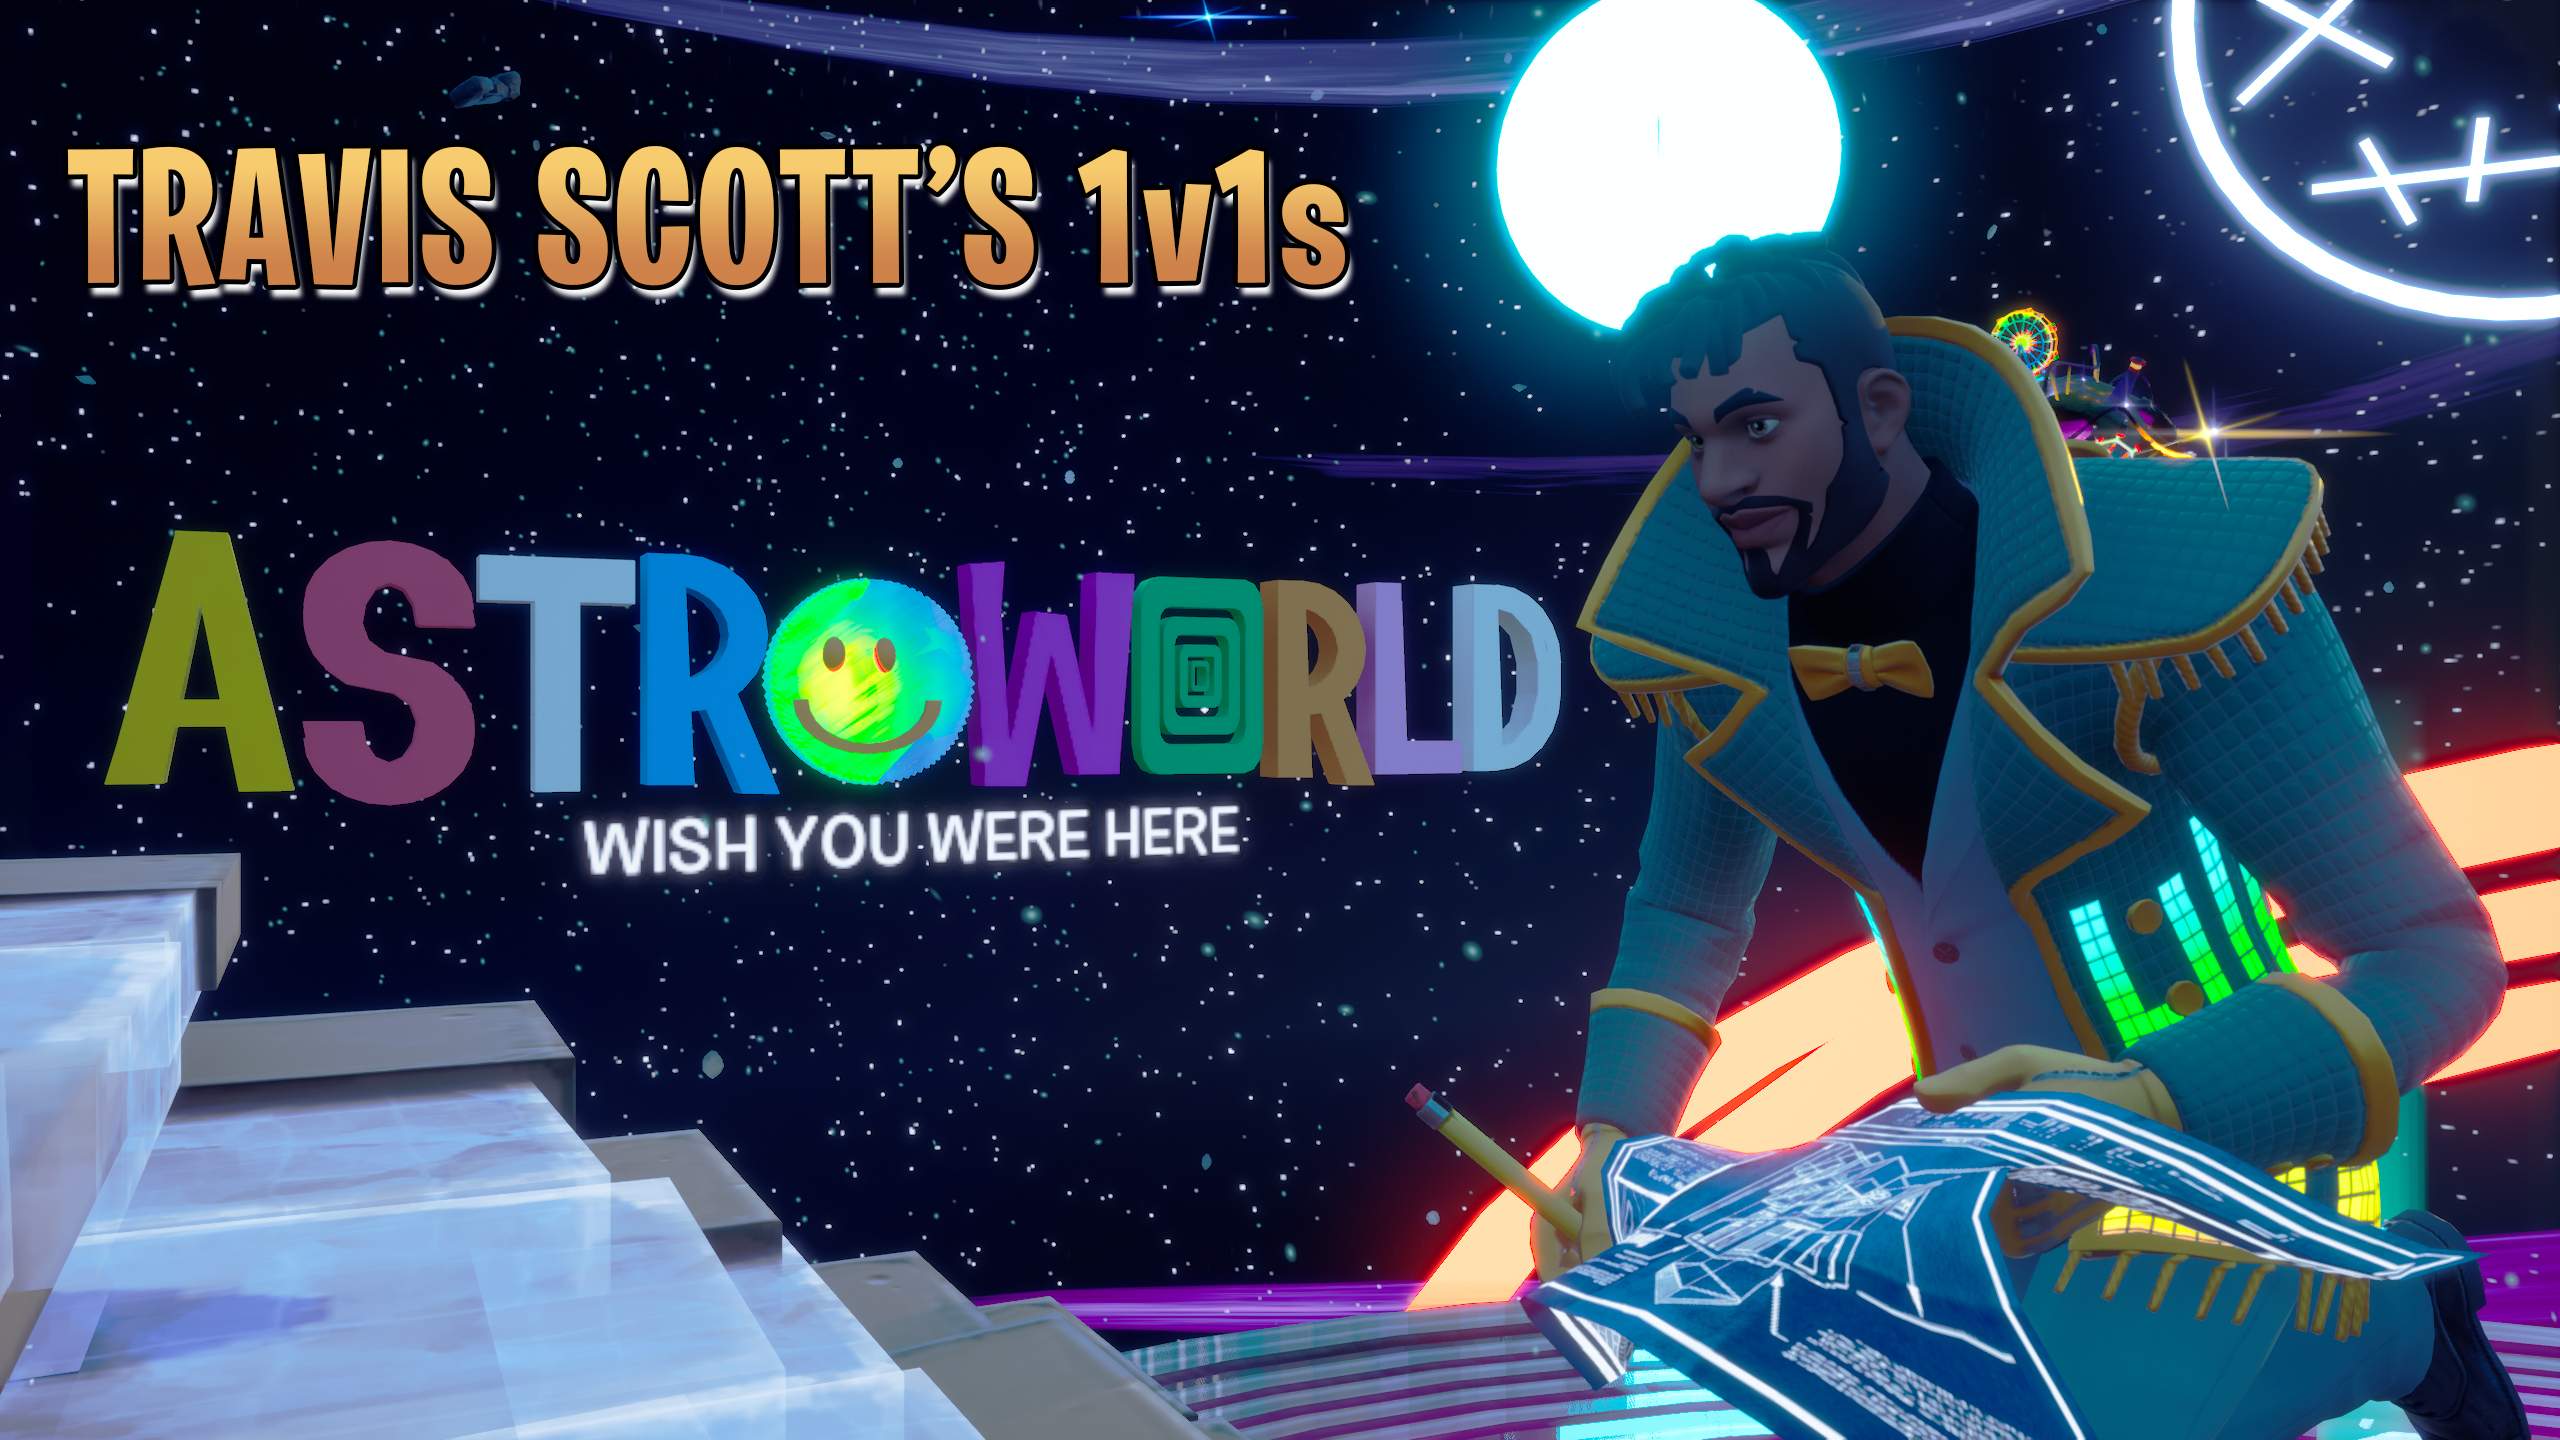 Travis Scott was added to Fortnite, and with that, an Astroworld